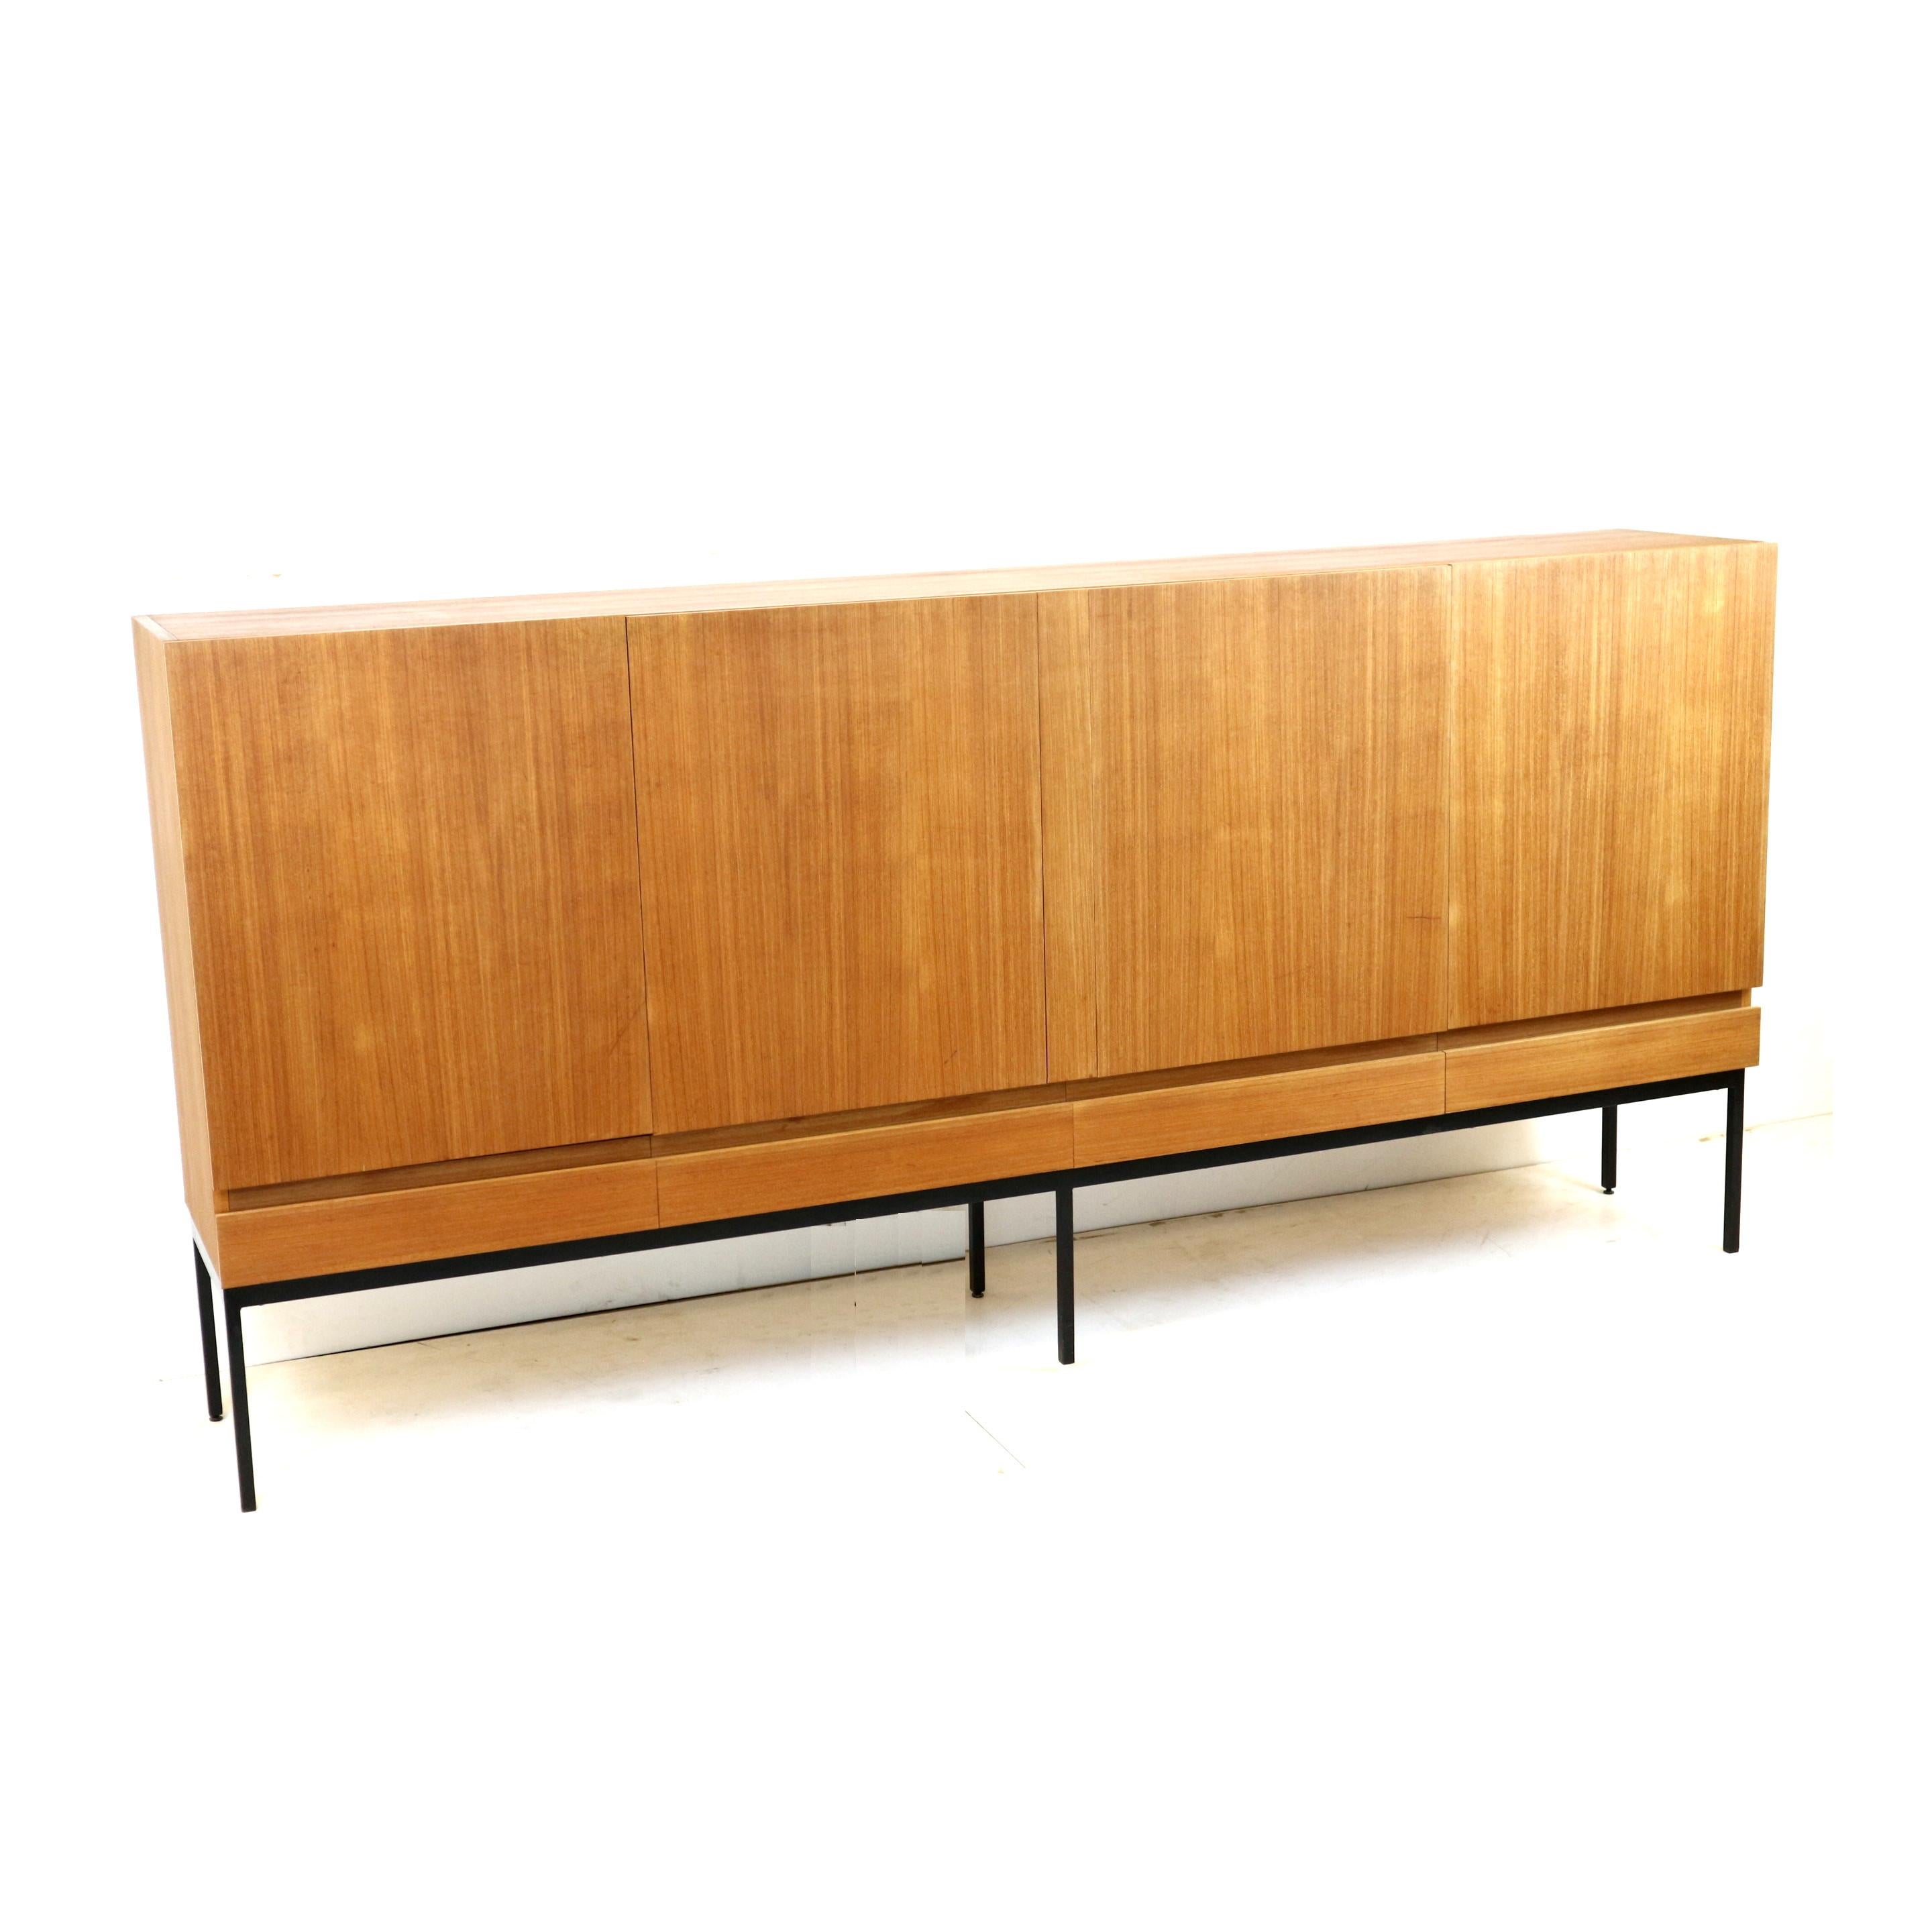 Mid-20th Century Vintage sideboard / highboard Dieter Waeckerlin B60 for Behr from the 1960s